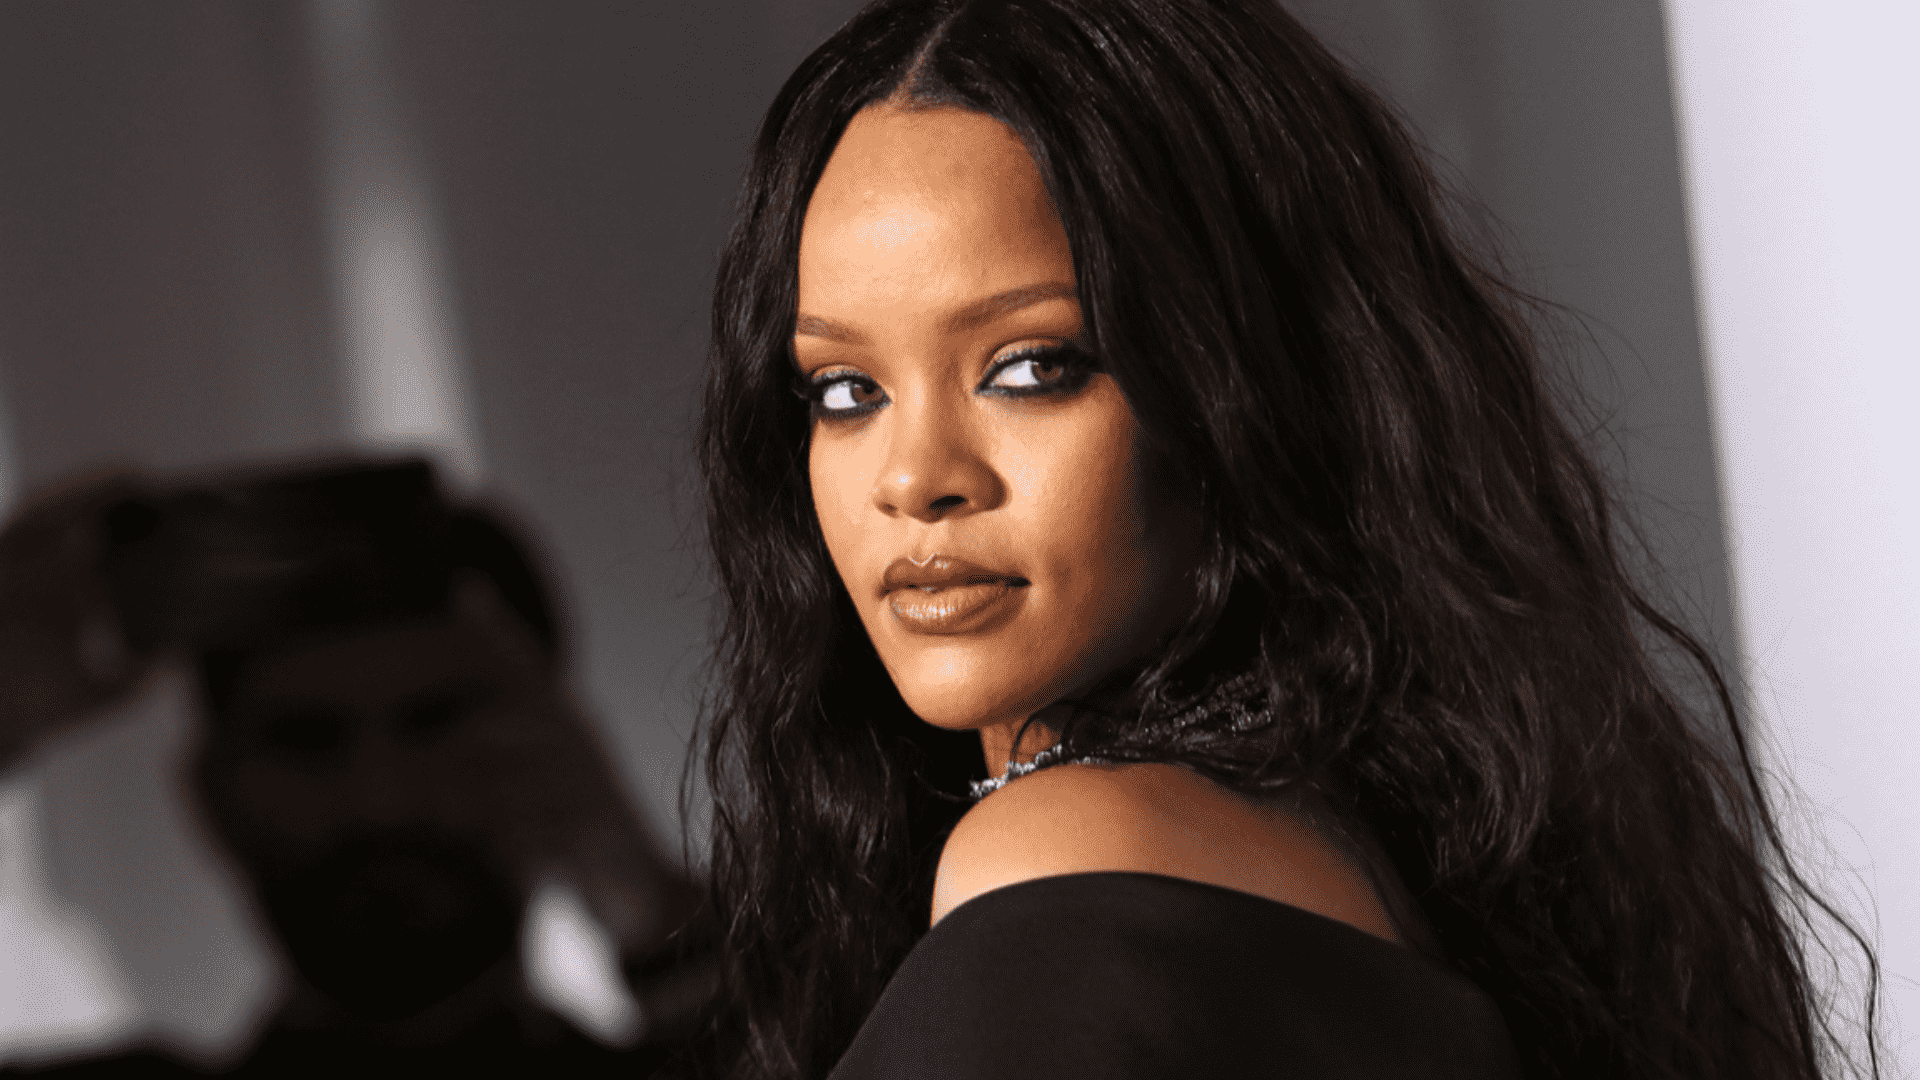 Rihanna's Ambitious Plans For Upcoming Album: 'It's Going To Be Amazing!